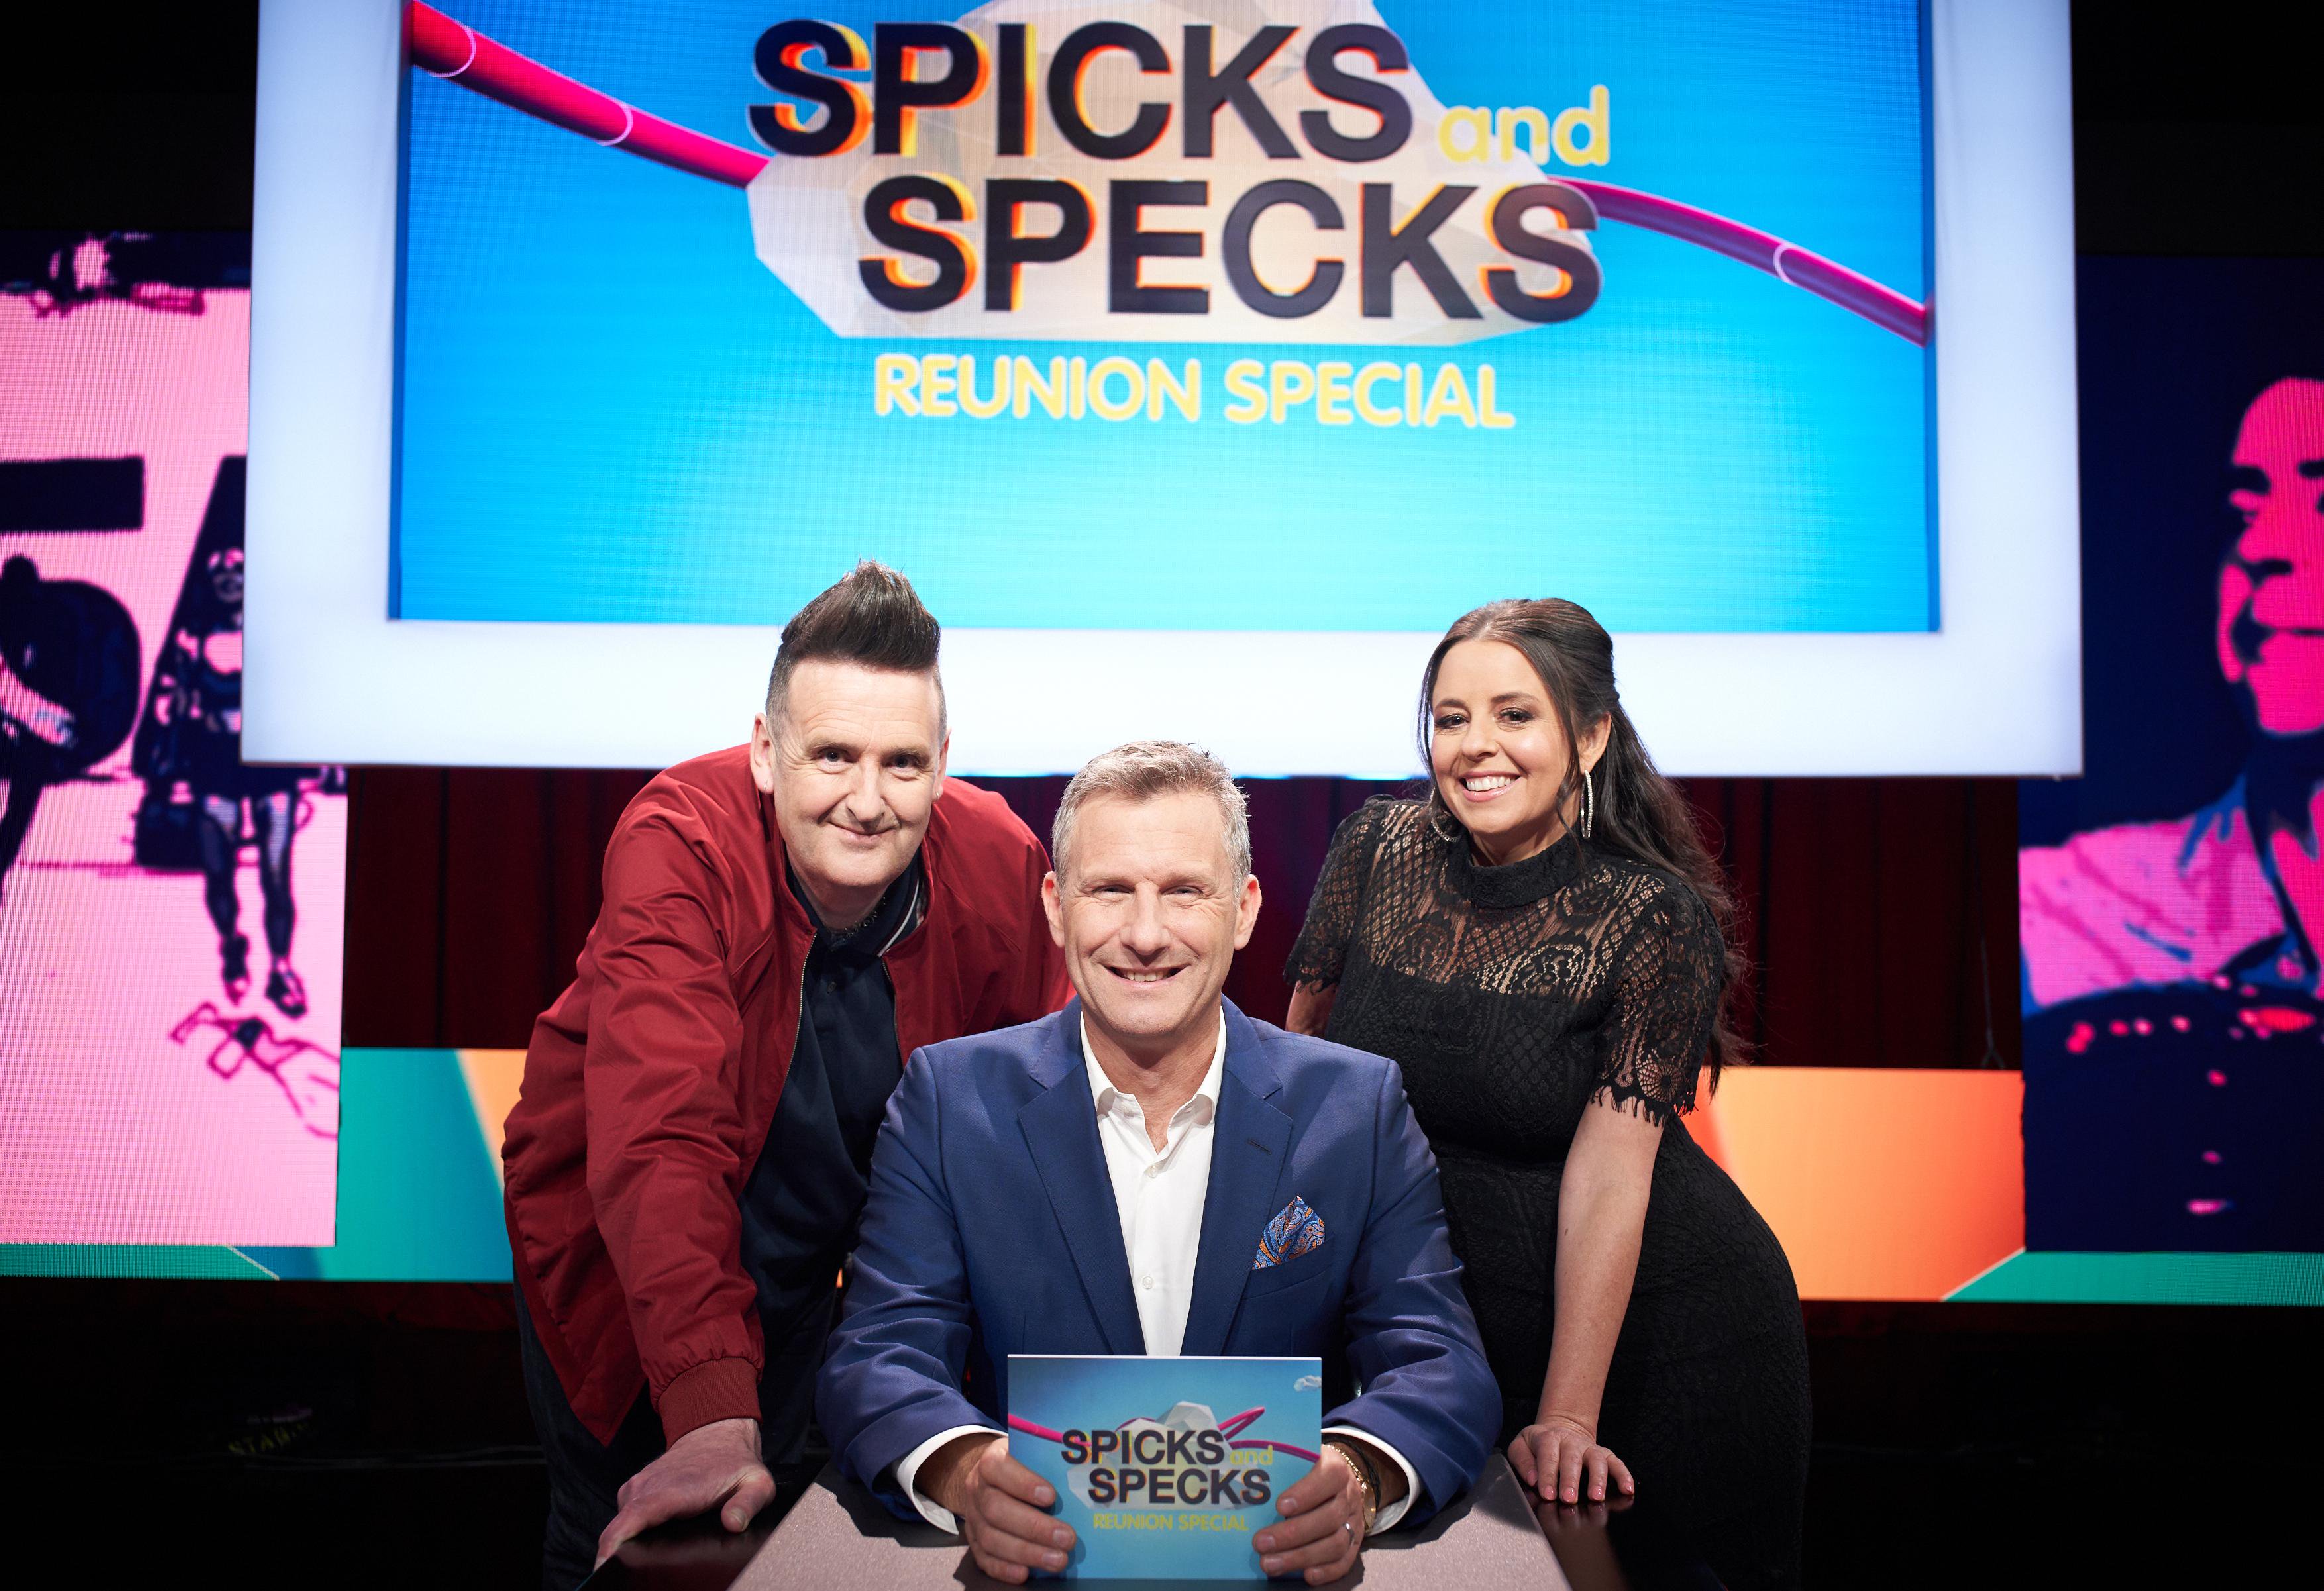 Forget The Reruns, New ‘Spicks And Specks’ Is Headed To Our Screens This November